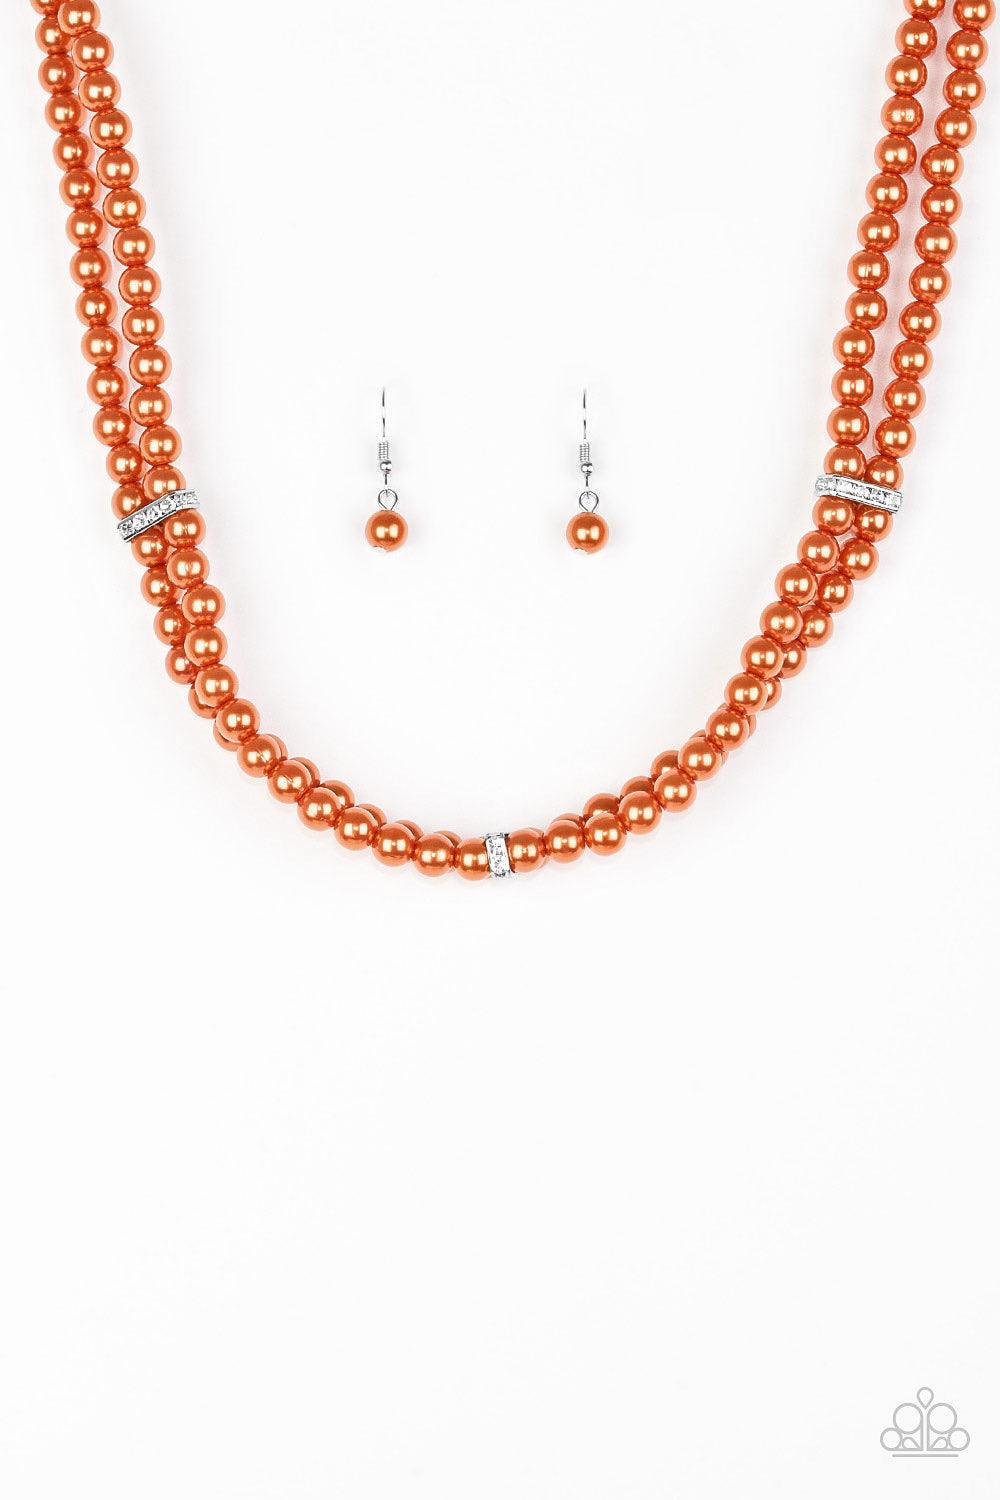 Paparazzi Accessories Put On Your Party Dress - Orange Pinched between white rhinestone encrusted frames, strands of classic orange pearls layer below the collar for a timeless look. Features an adjustable clasp closure. Jewelry